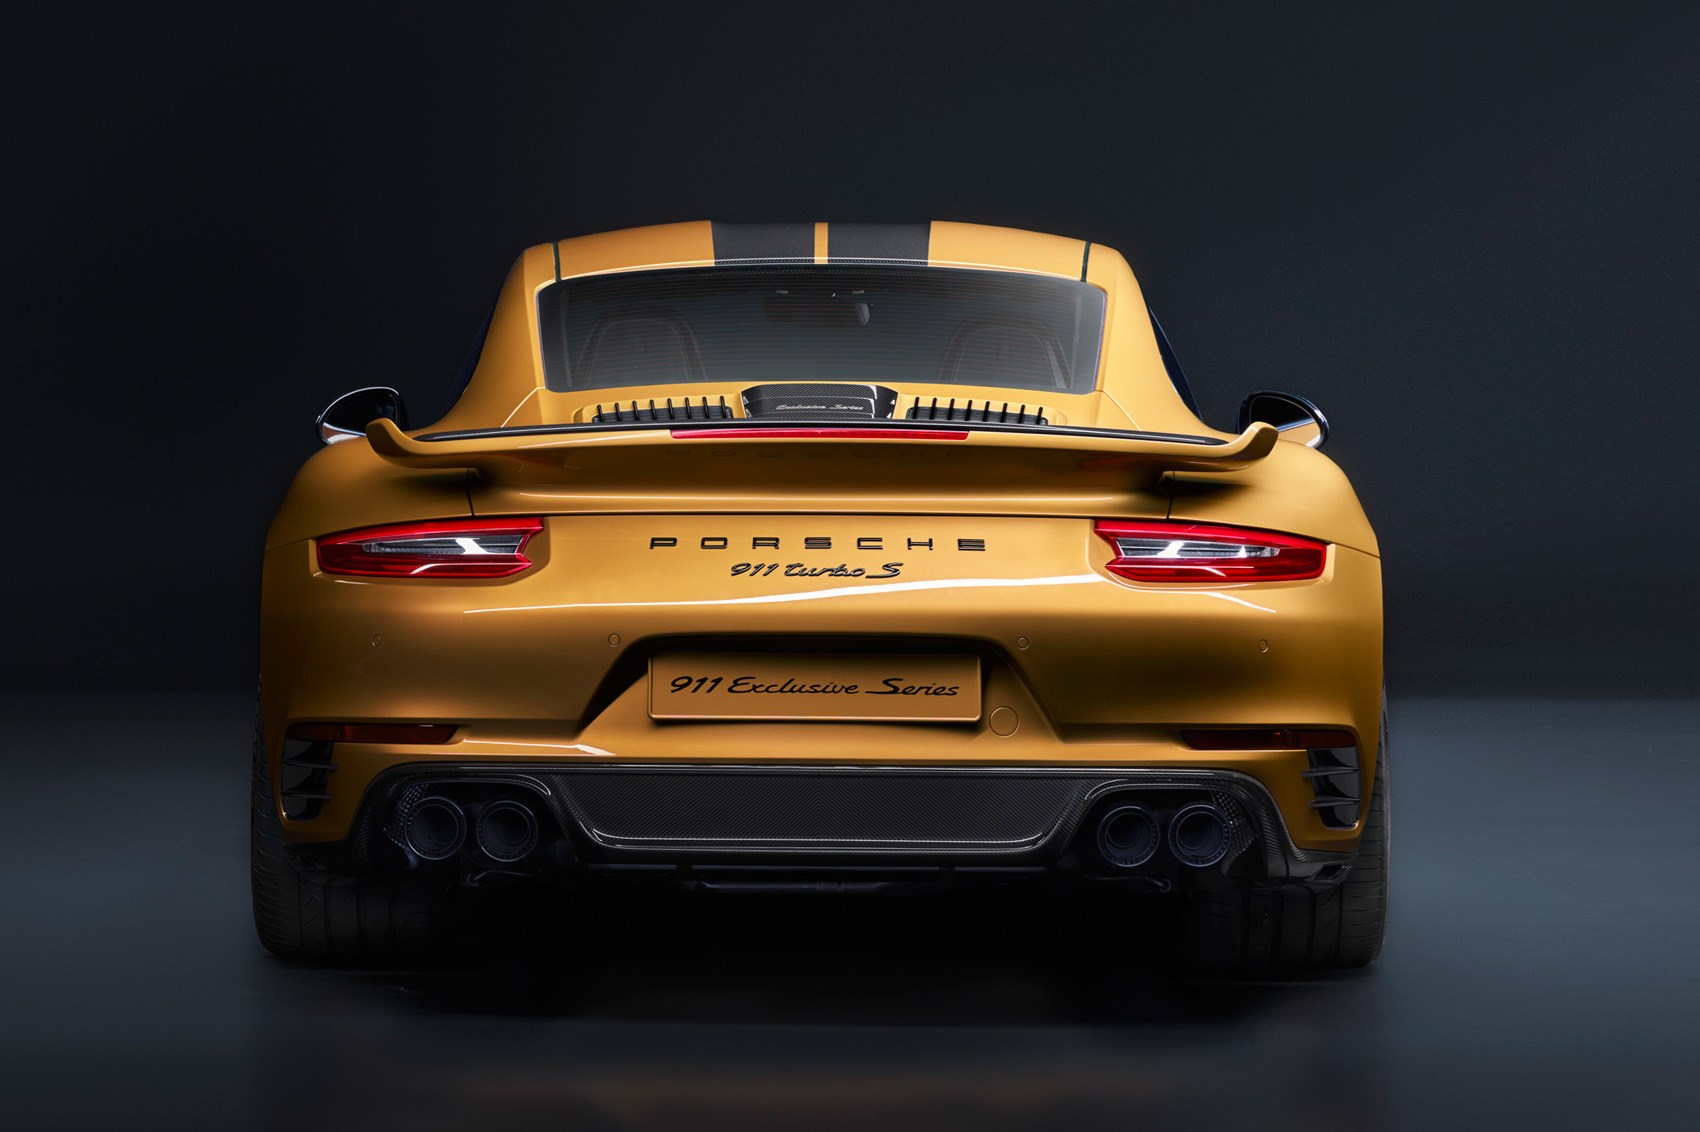 Porsche 911 Turbo S Exclusive Series: the most powerful ...